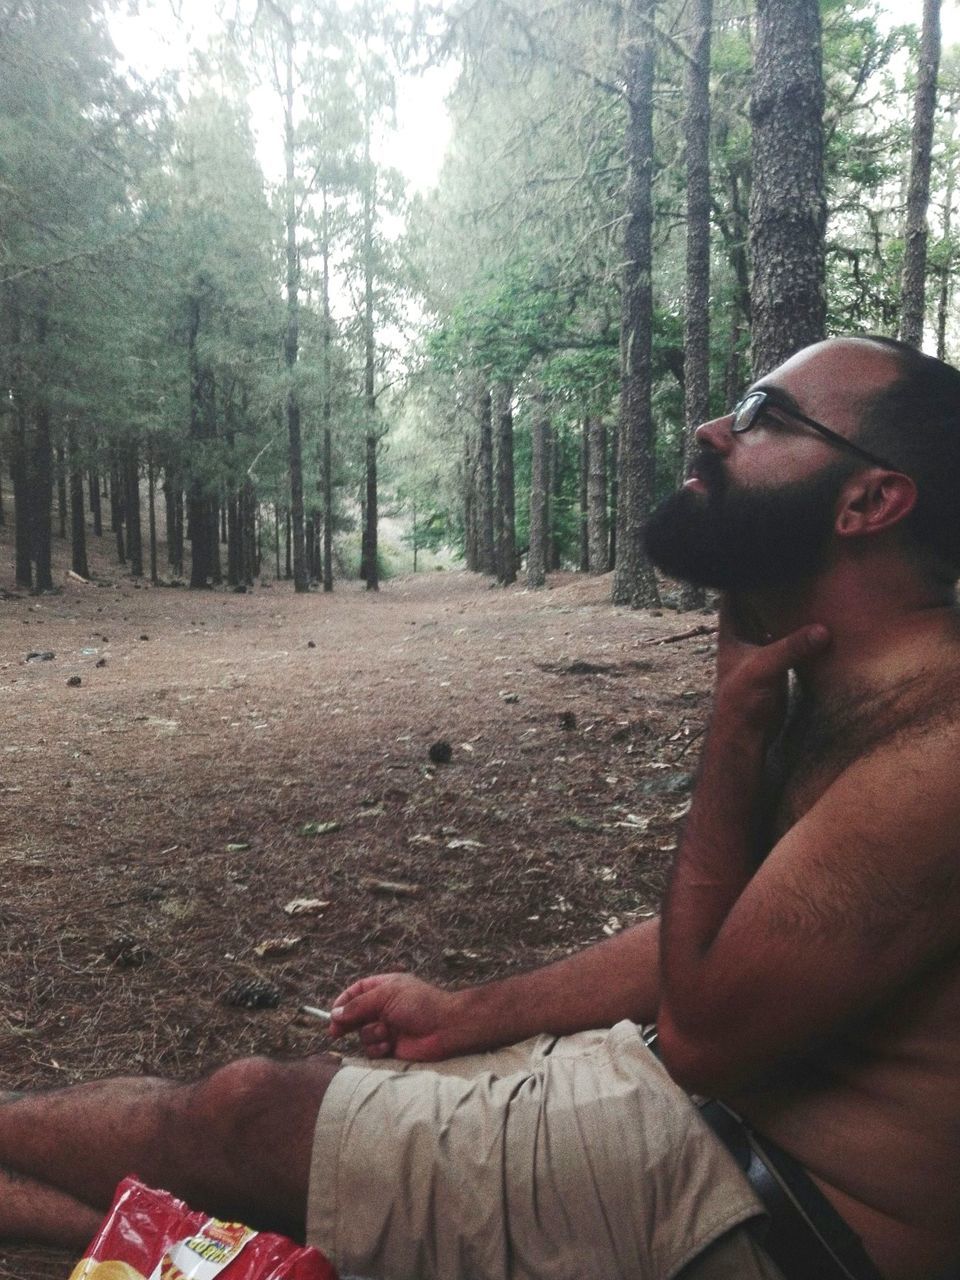 Side view of shirtless man sitting against trees in forest